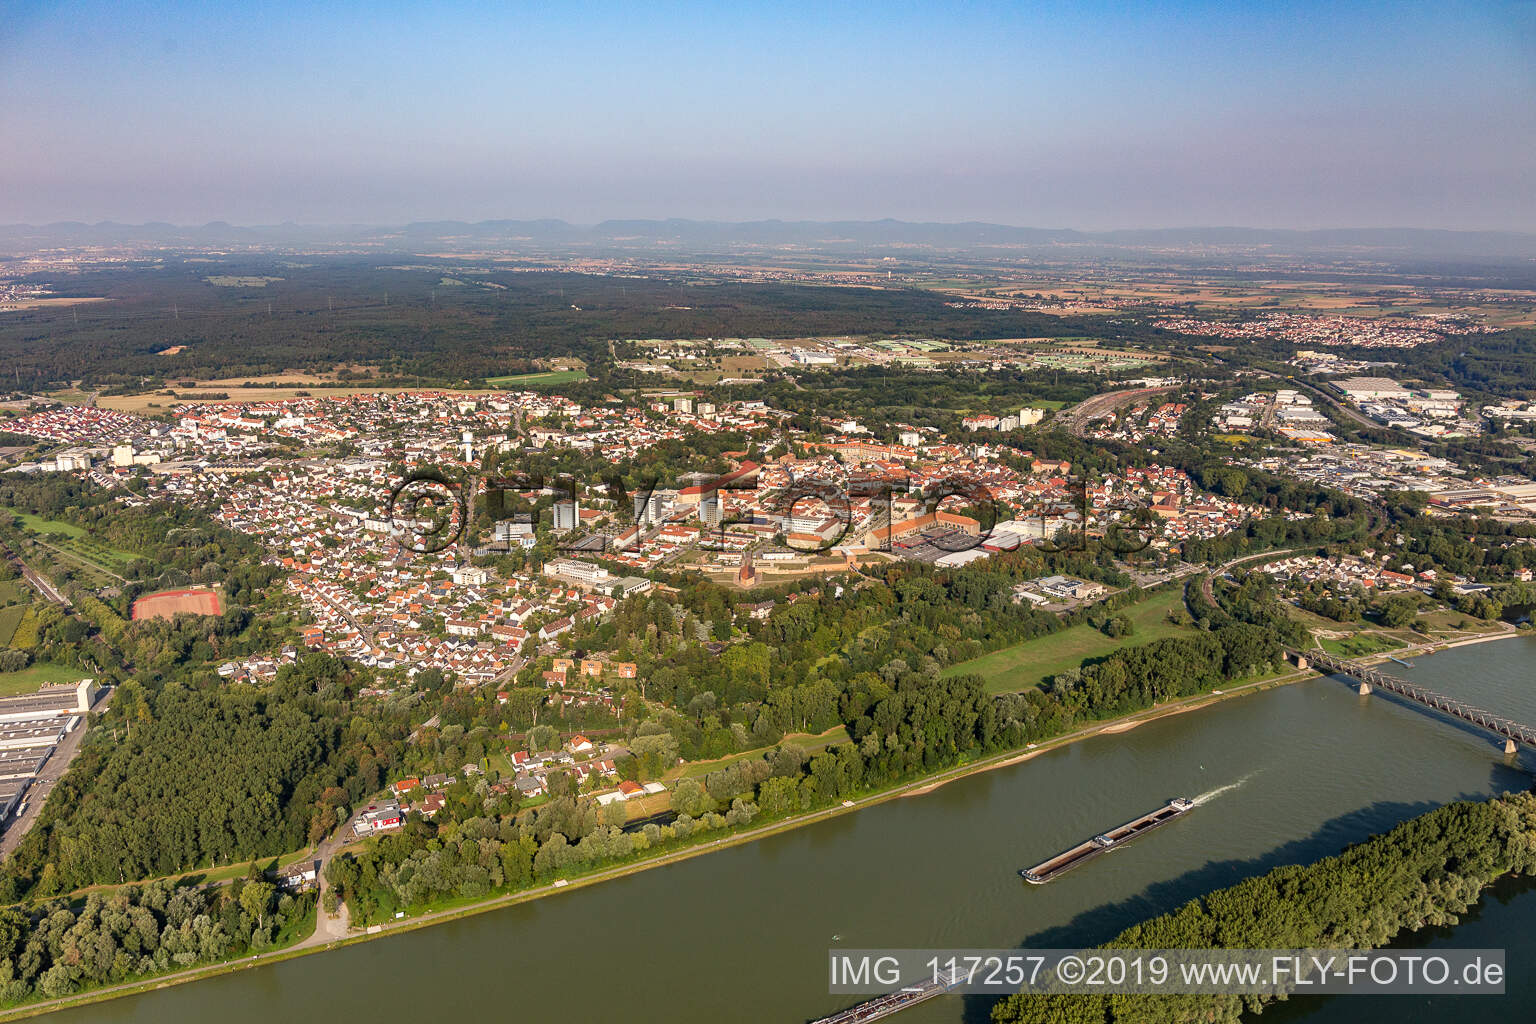 Germersheim in the state Rhineland-Palatinate, Germany from a drone